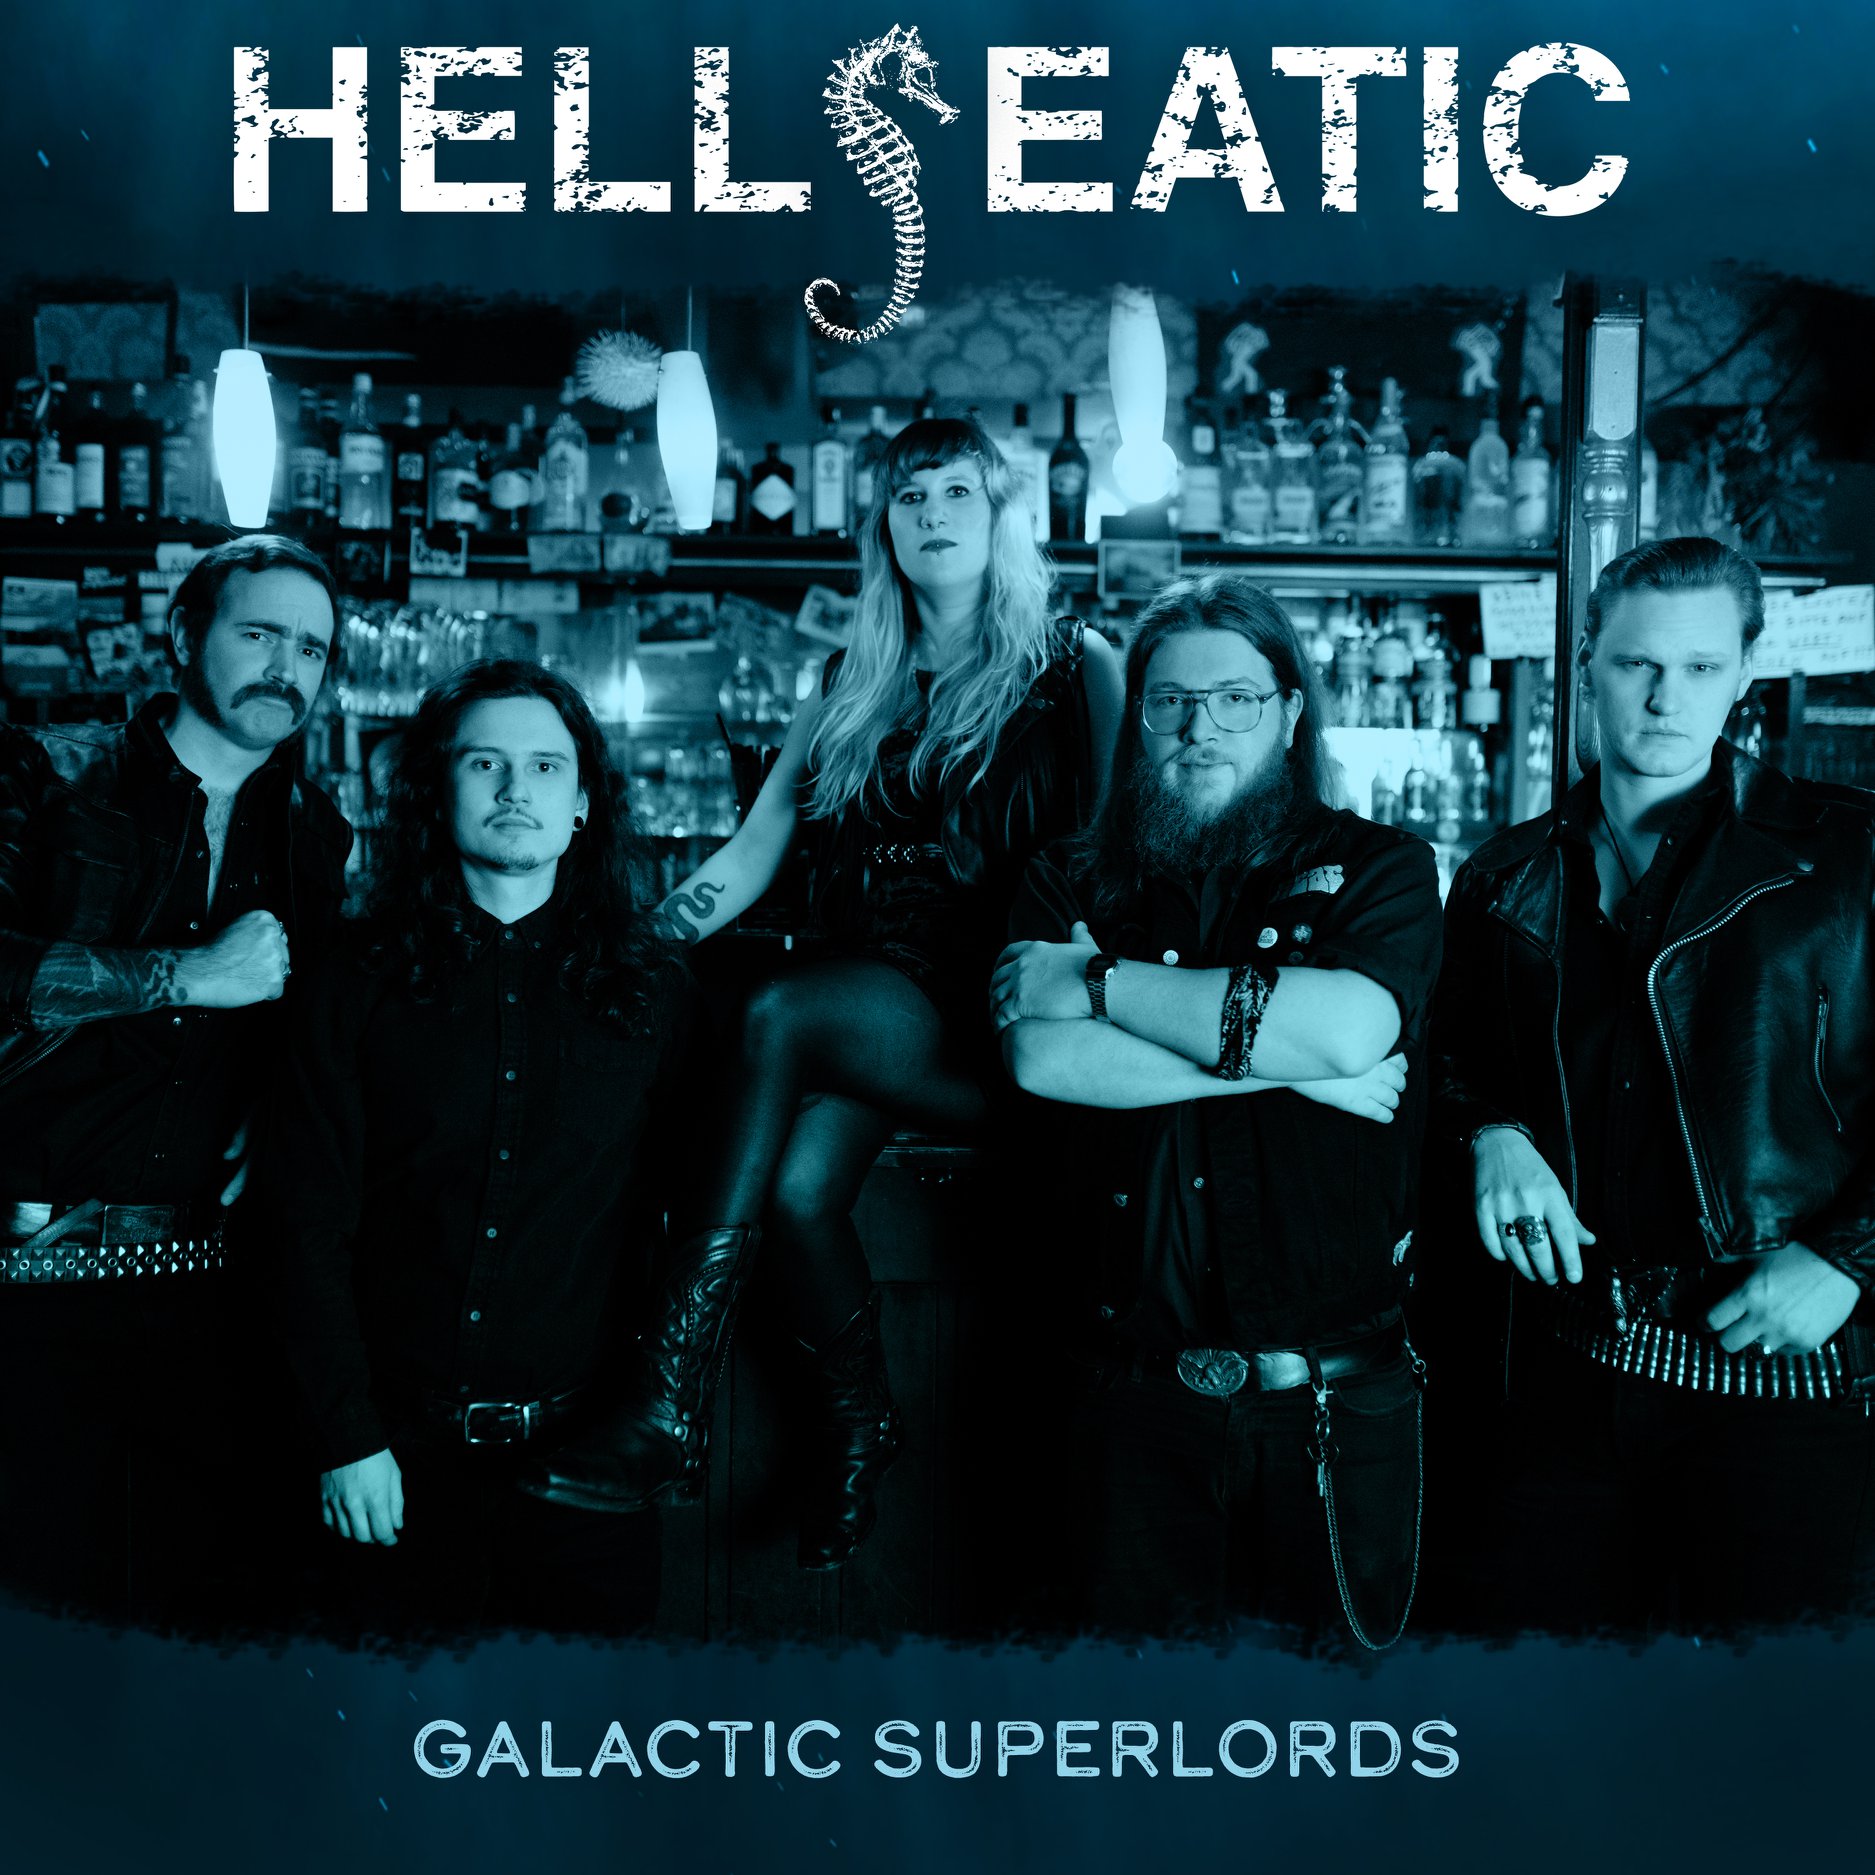 galactic superlords